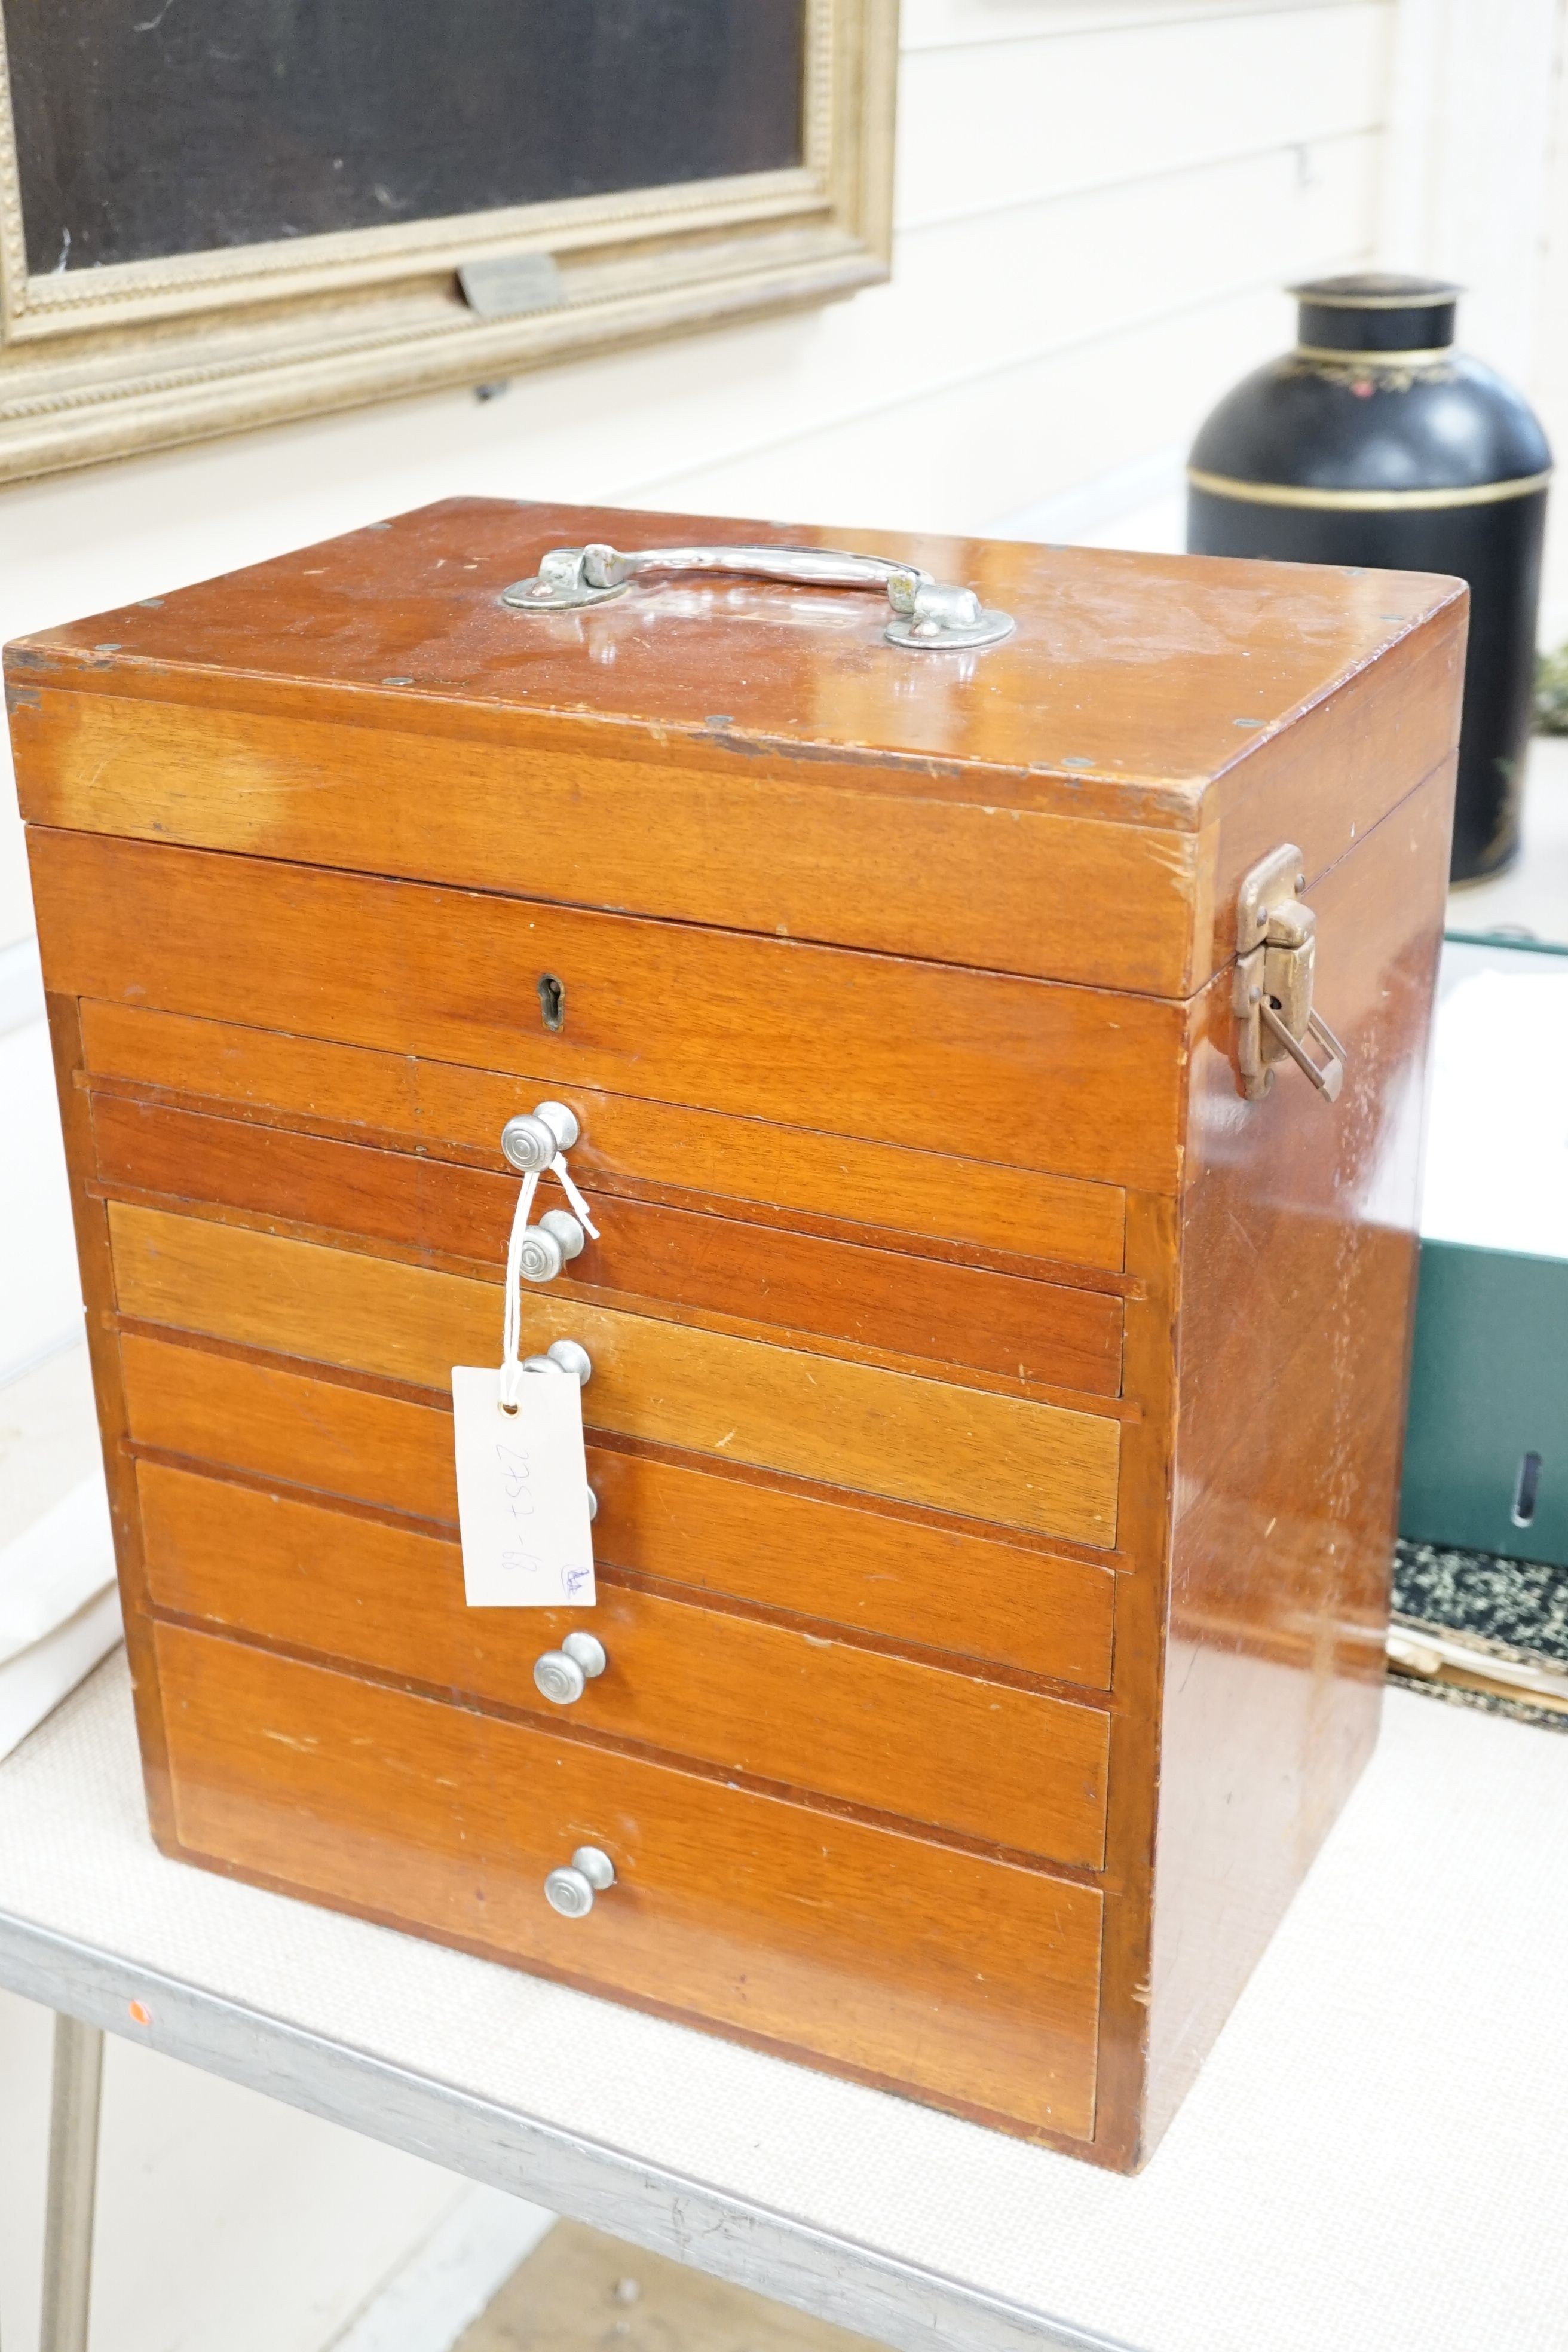 A mid 20th century mahogany dentist’s cabinets and accessories, 39.5 x 34 cms wide.